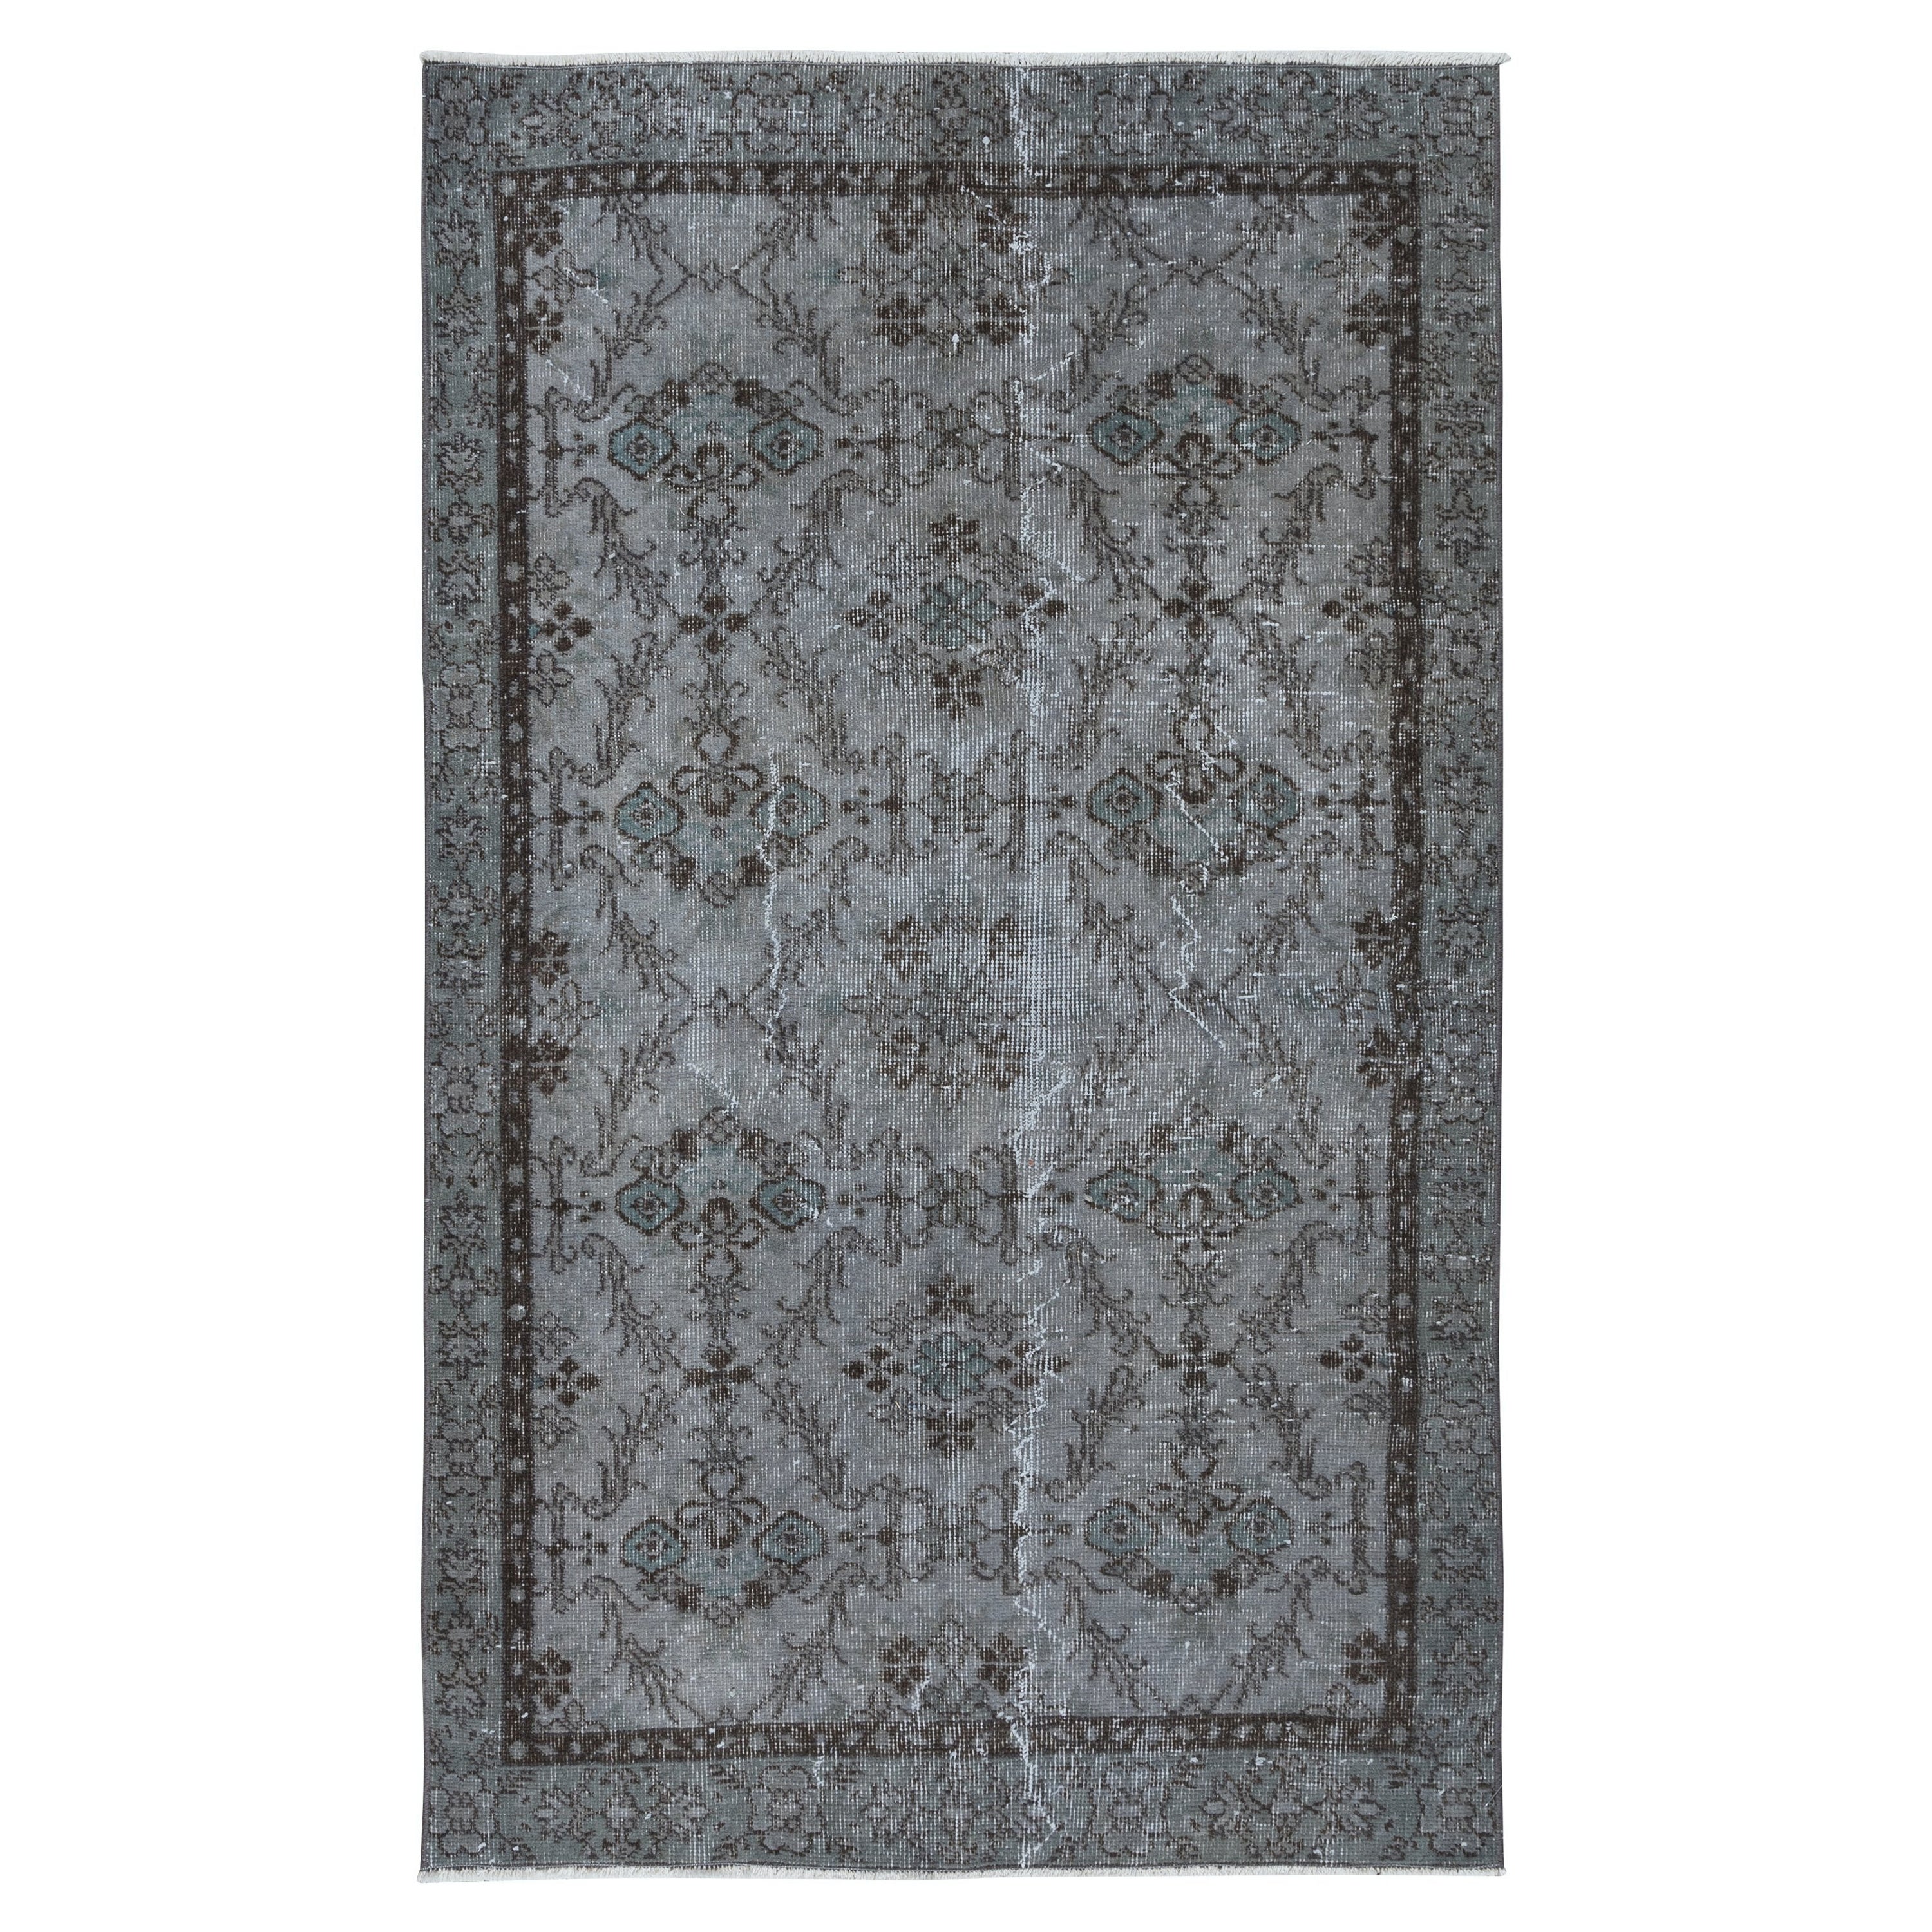 3.7x6 Ft Modern Handmade Turkish Accent Rug in Gray Tones, Low Pile Small Carpet For Sale